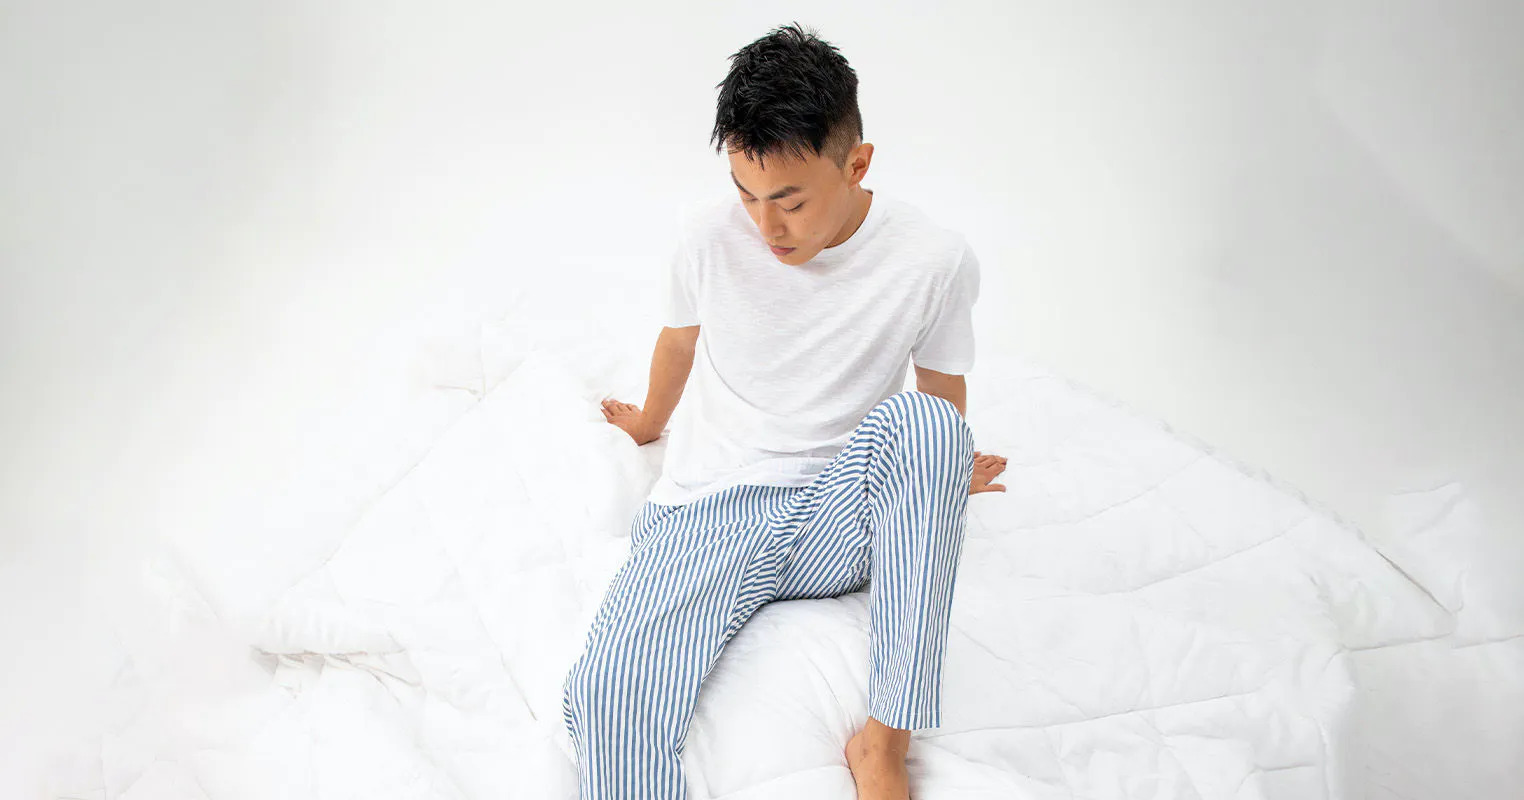 Loungewear fashion tips for men: Here's how to give pyjamas a